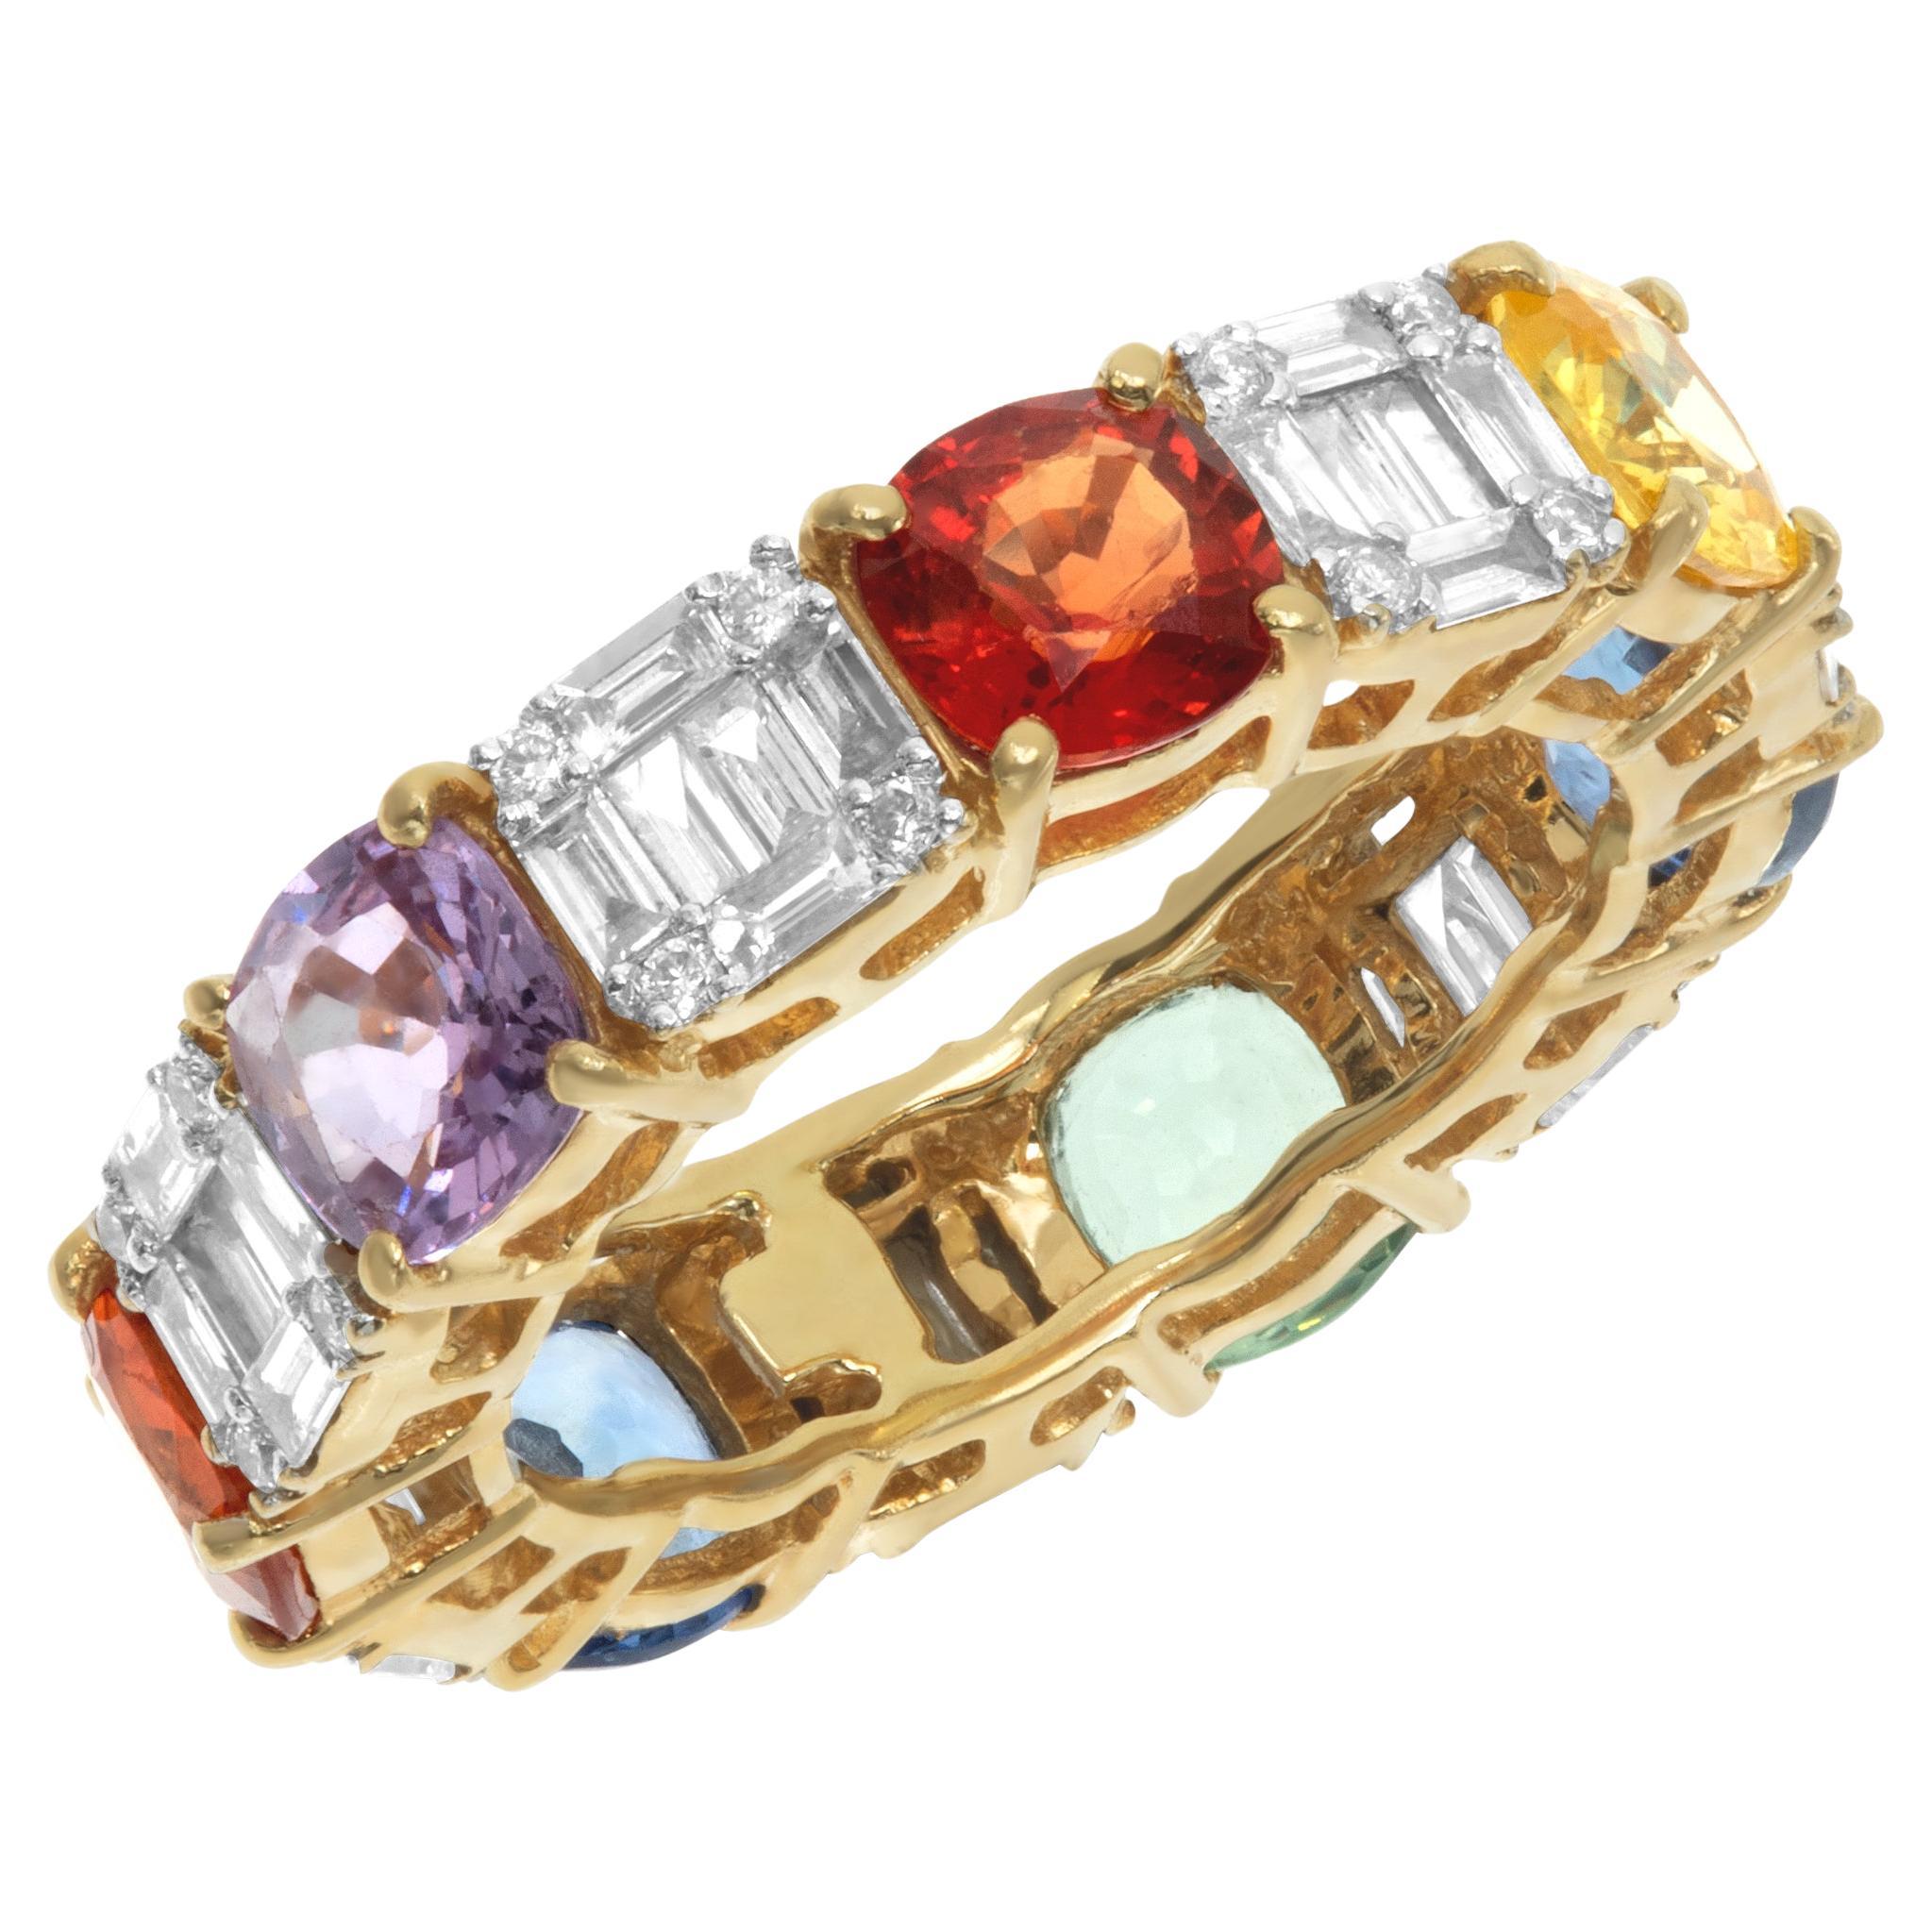 Multi-colored sapphires eternity band in yellow gold.